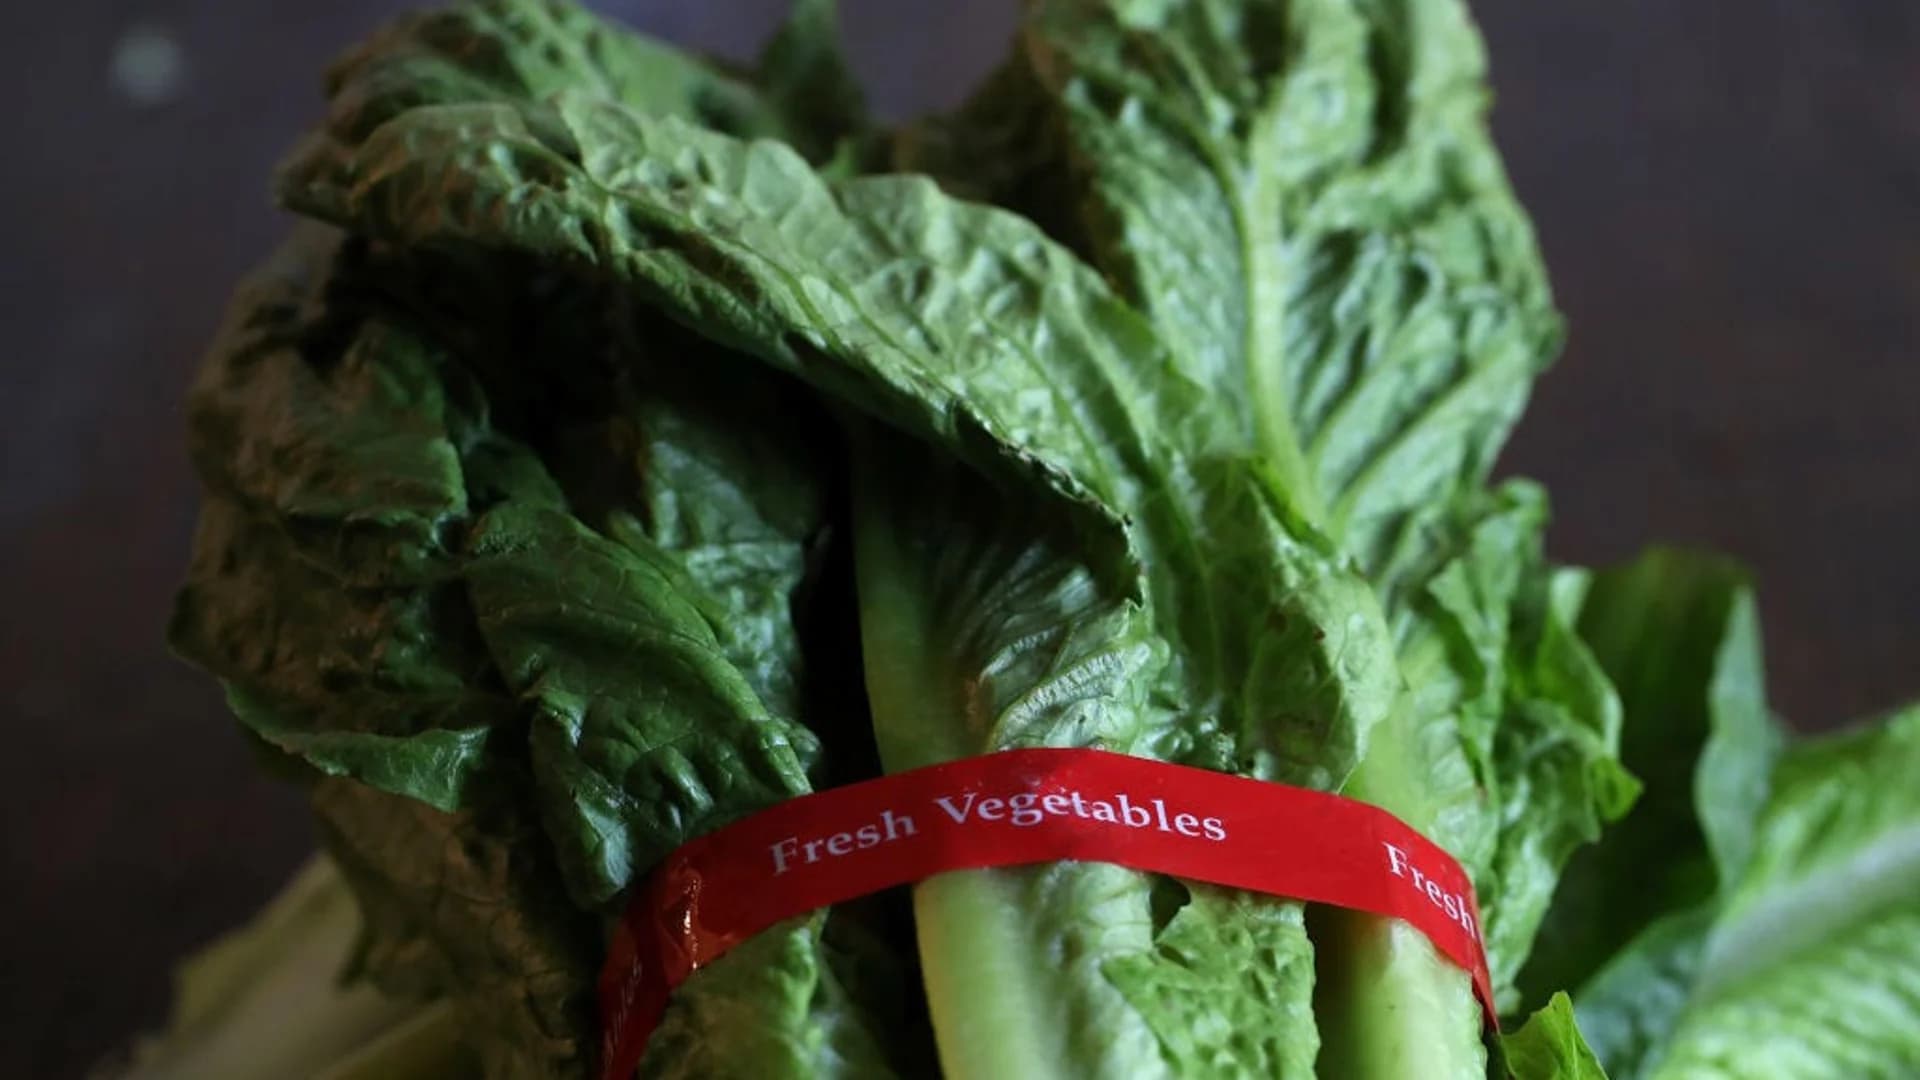 People in US, Canada warned to not eat romaine lettuce